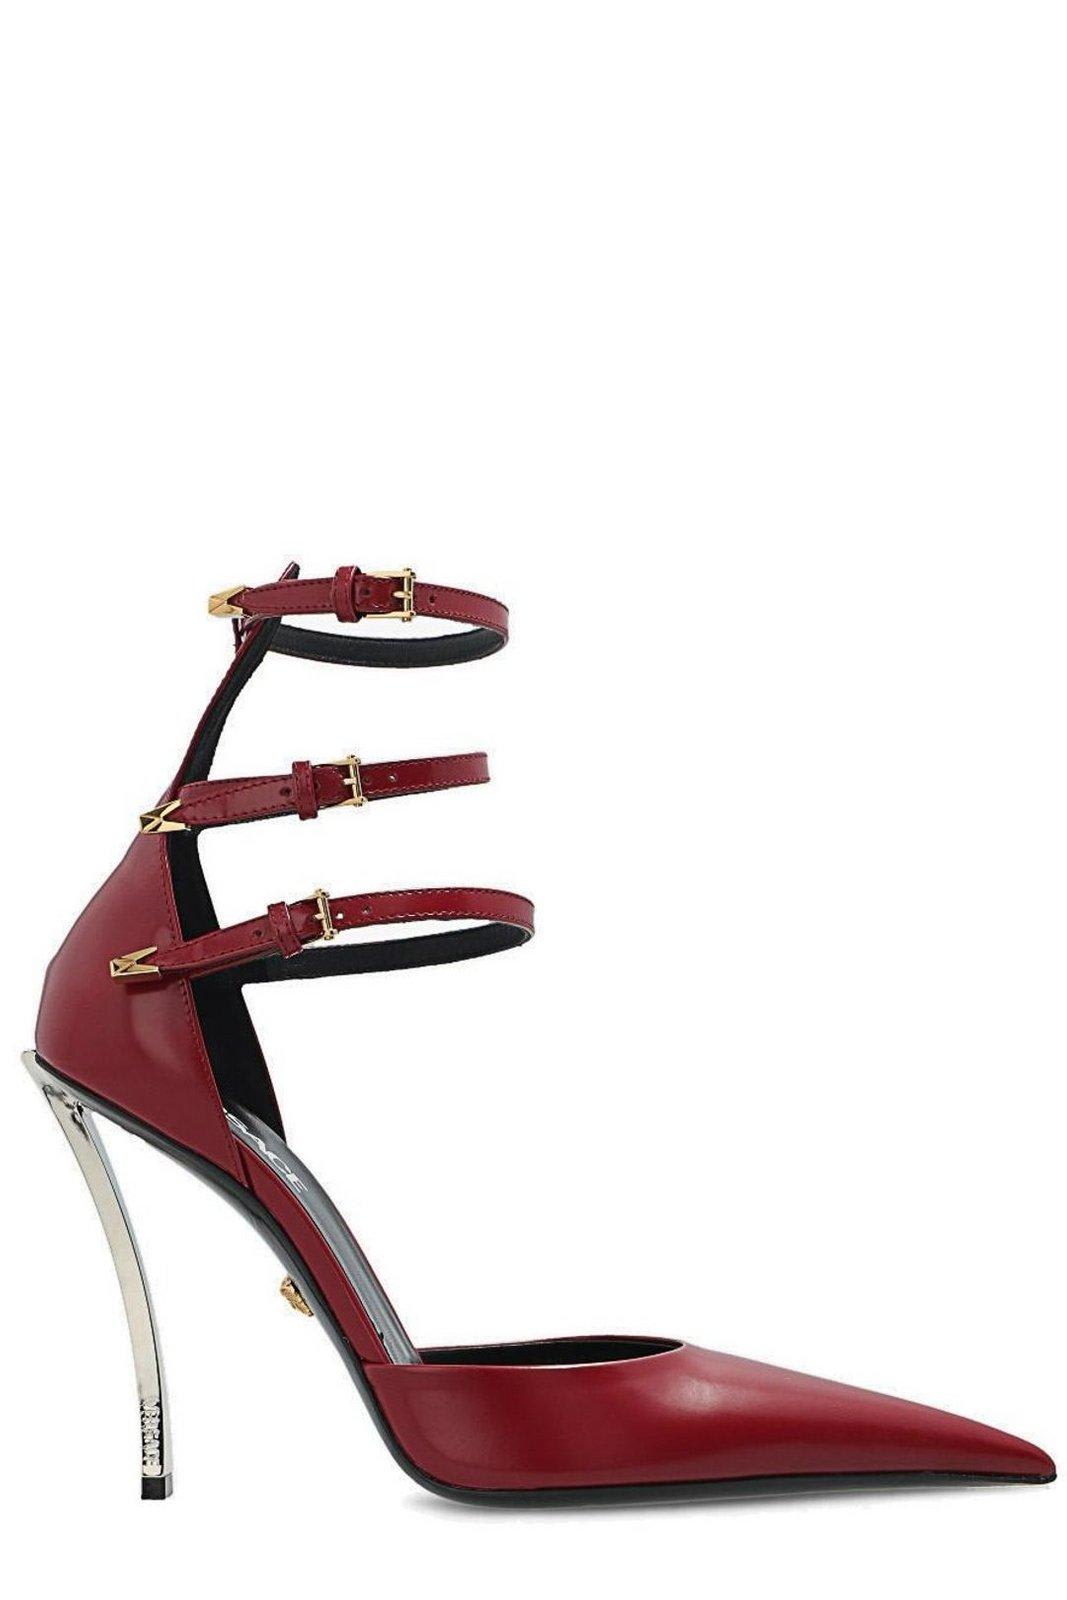 Versace Pointed Toe Ankle Strap Pumps